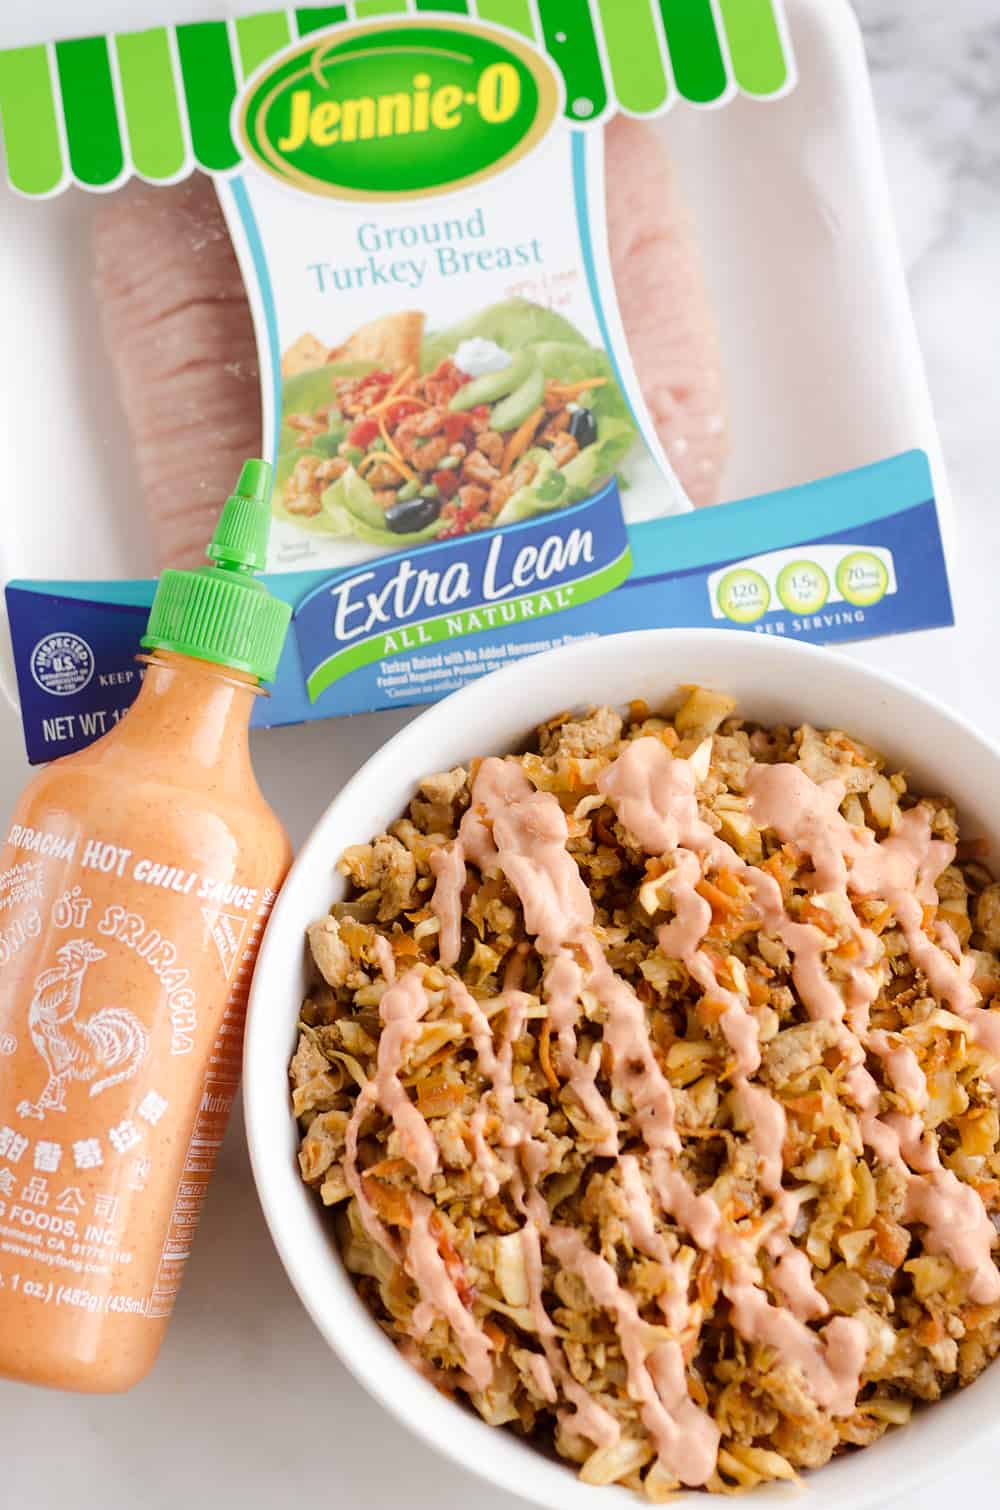 Turkey Egg Roll Bowl with Creamy Sriracha is an amazingly healthy and delicious bowl of goodness perfect for lunch or dinner! Sauteed cabbage, carrots, onion and ground turkey are tossed with an Asian inspired sauce and topped with a creamy Greek yogurt sriracha mayo sauce.